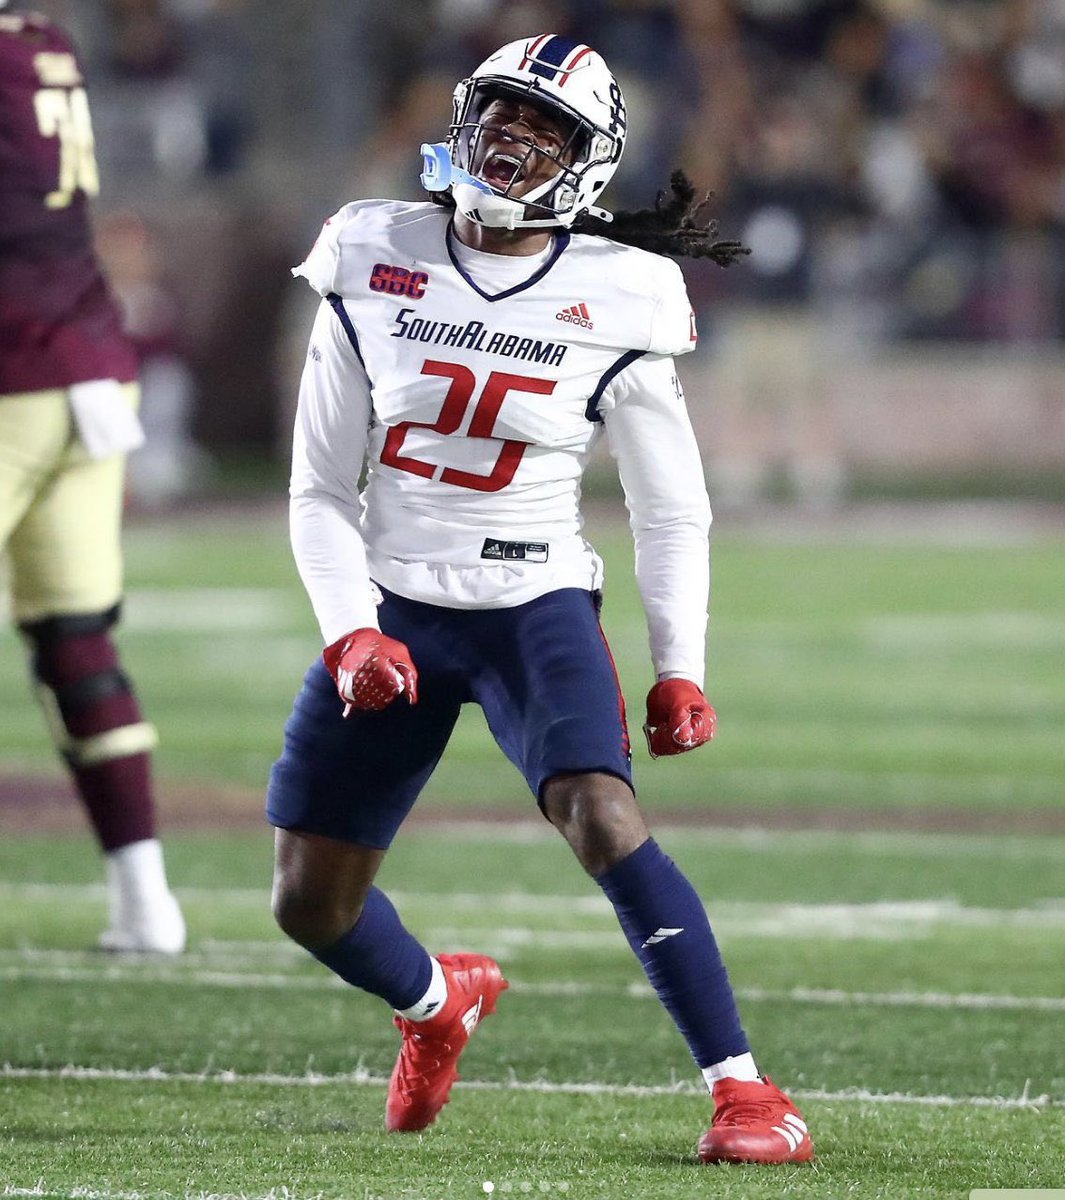 The current expectation is that ex-South Alabama standout linebacker Khalil Jacobs is going to end up at Missouri, sources tell @247Sports. Jacobs, who also visited Alabama, Auburn and Ole Miss, had 56 tackles, 8.5 tackles for loss, three sacks & three forced fumbles last year.